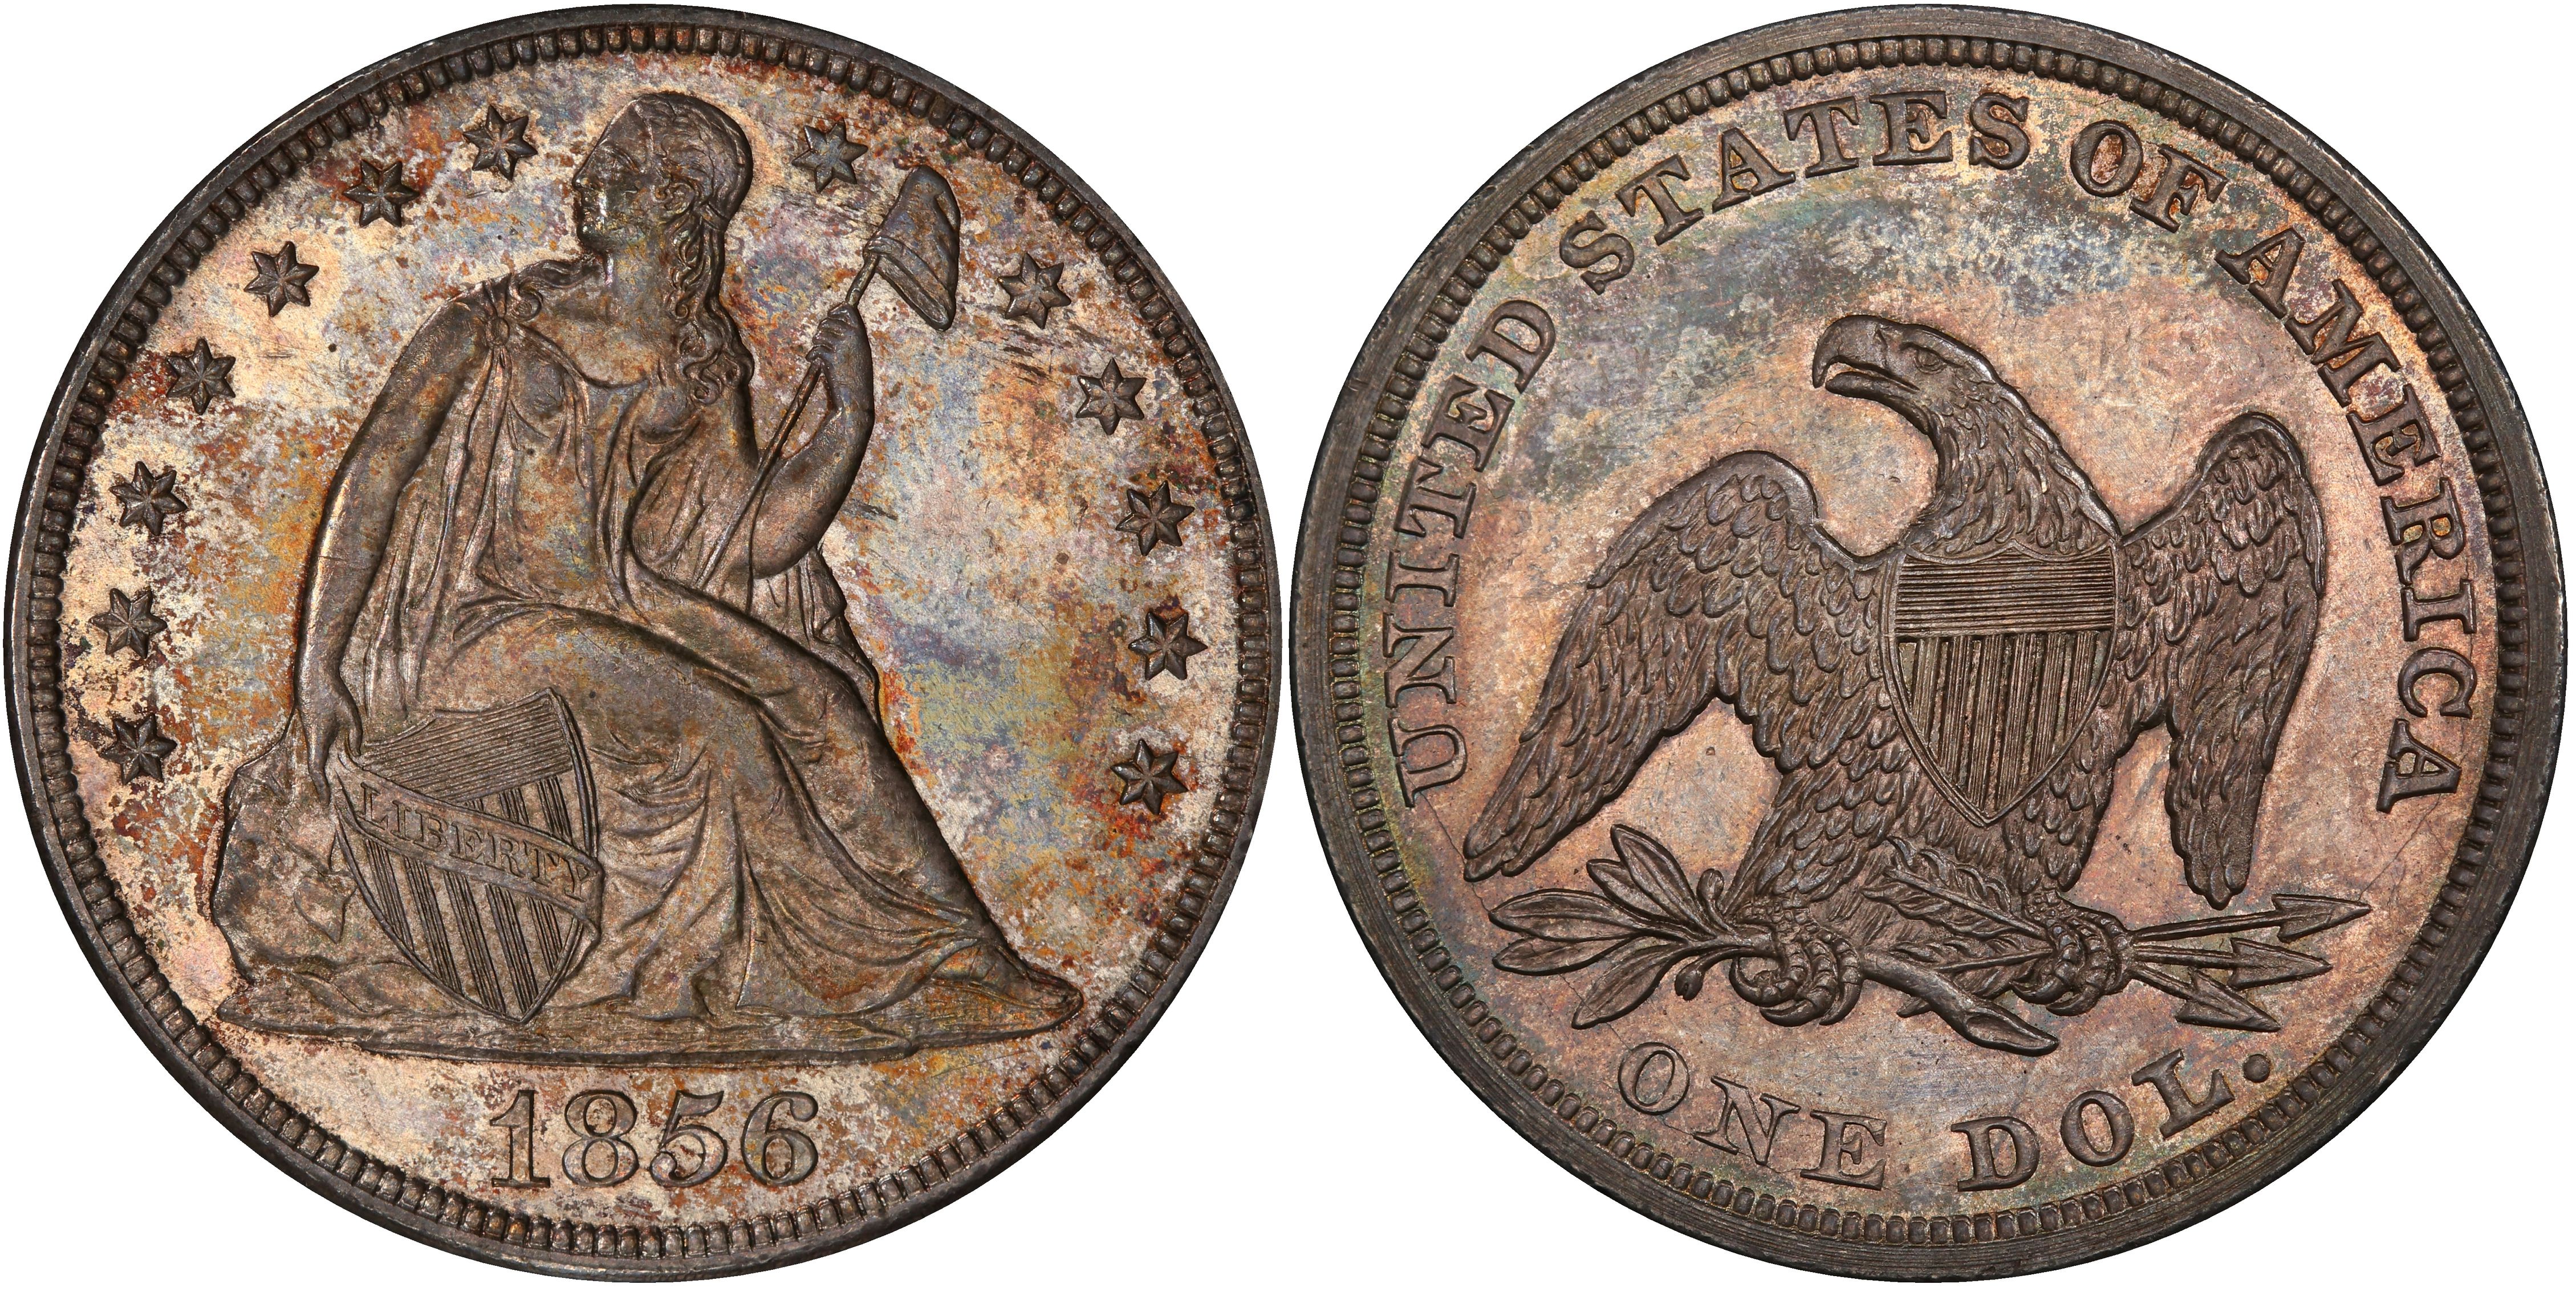 1851 $1 (Regular Strike) Liberty Seated Dollar - PCGS CoinFacts